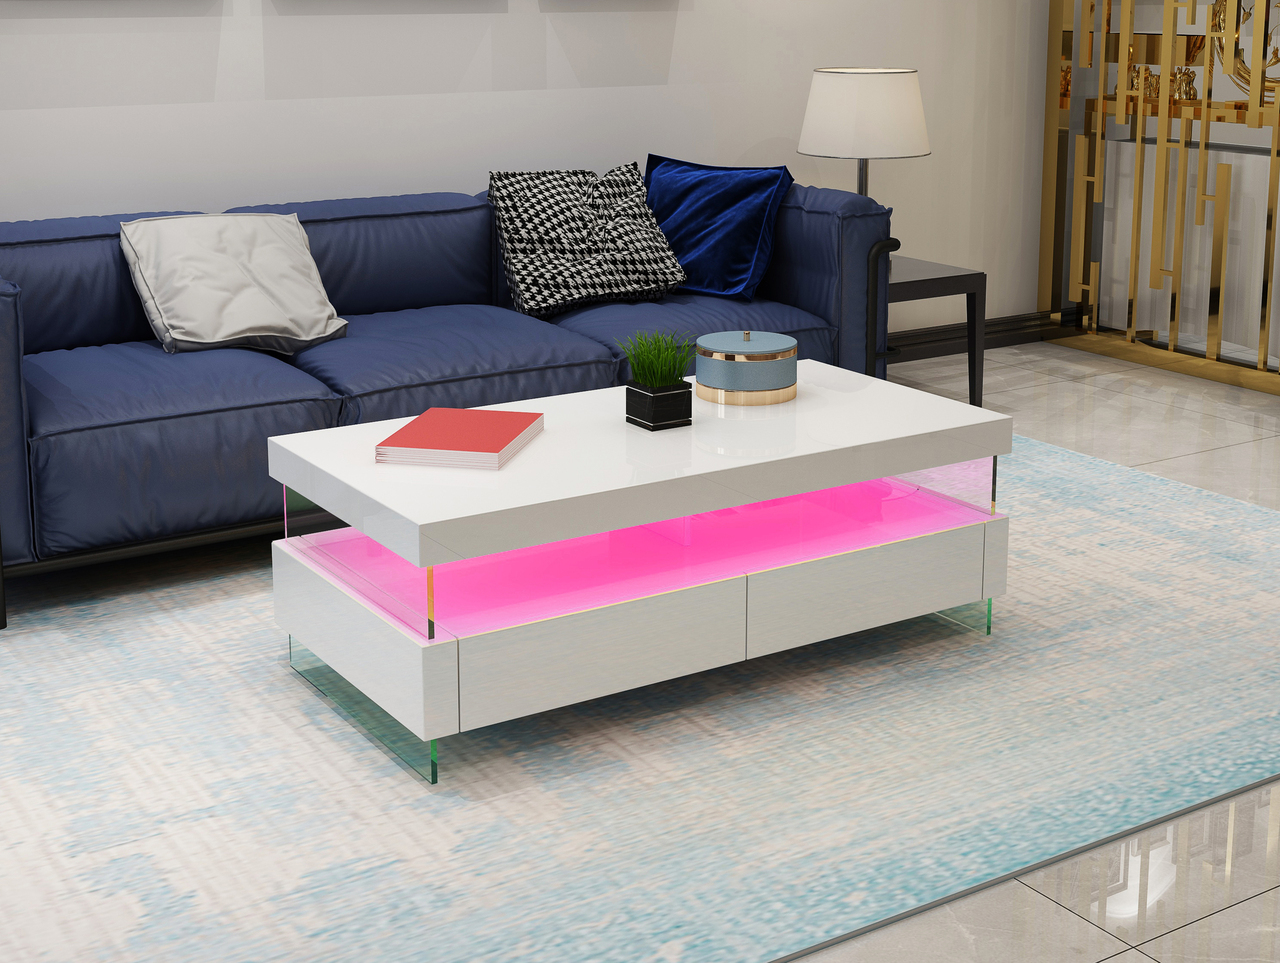 https://cdn.1stopbedrooms.com/media/catalog/product/r/i/ria-modern-and-contemporary-style-built-in-led-style-coffee-table-in-white-color-made-with-wood-and-glossy-finish_qb13460002.jpg